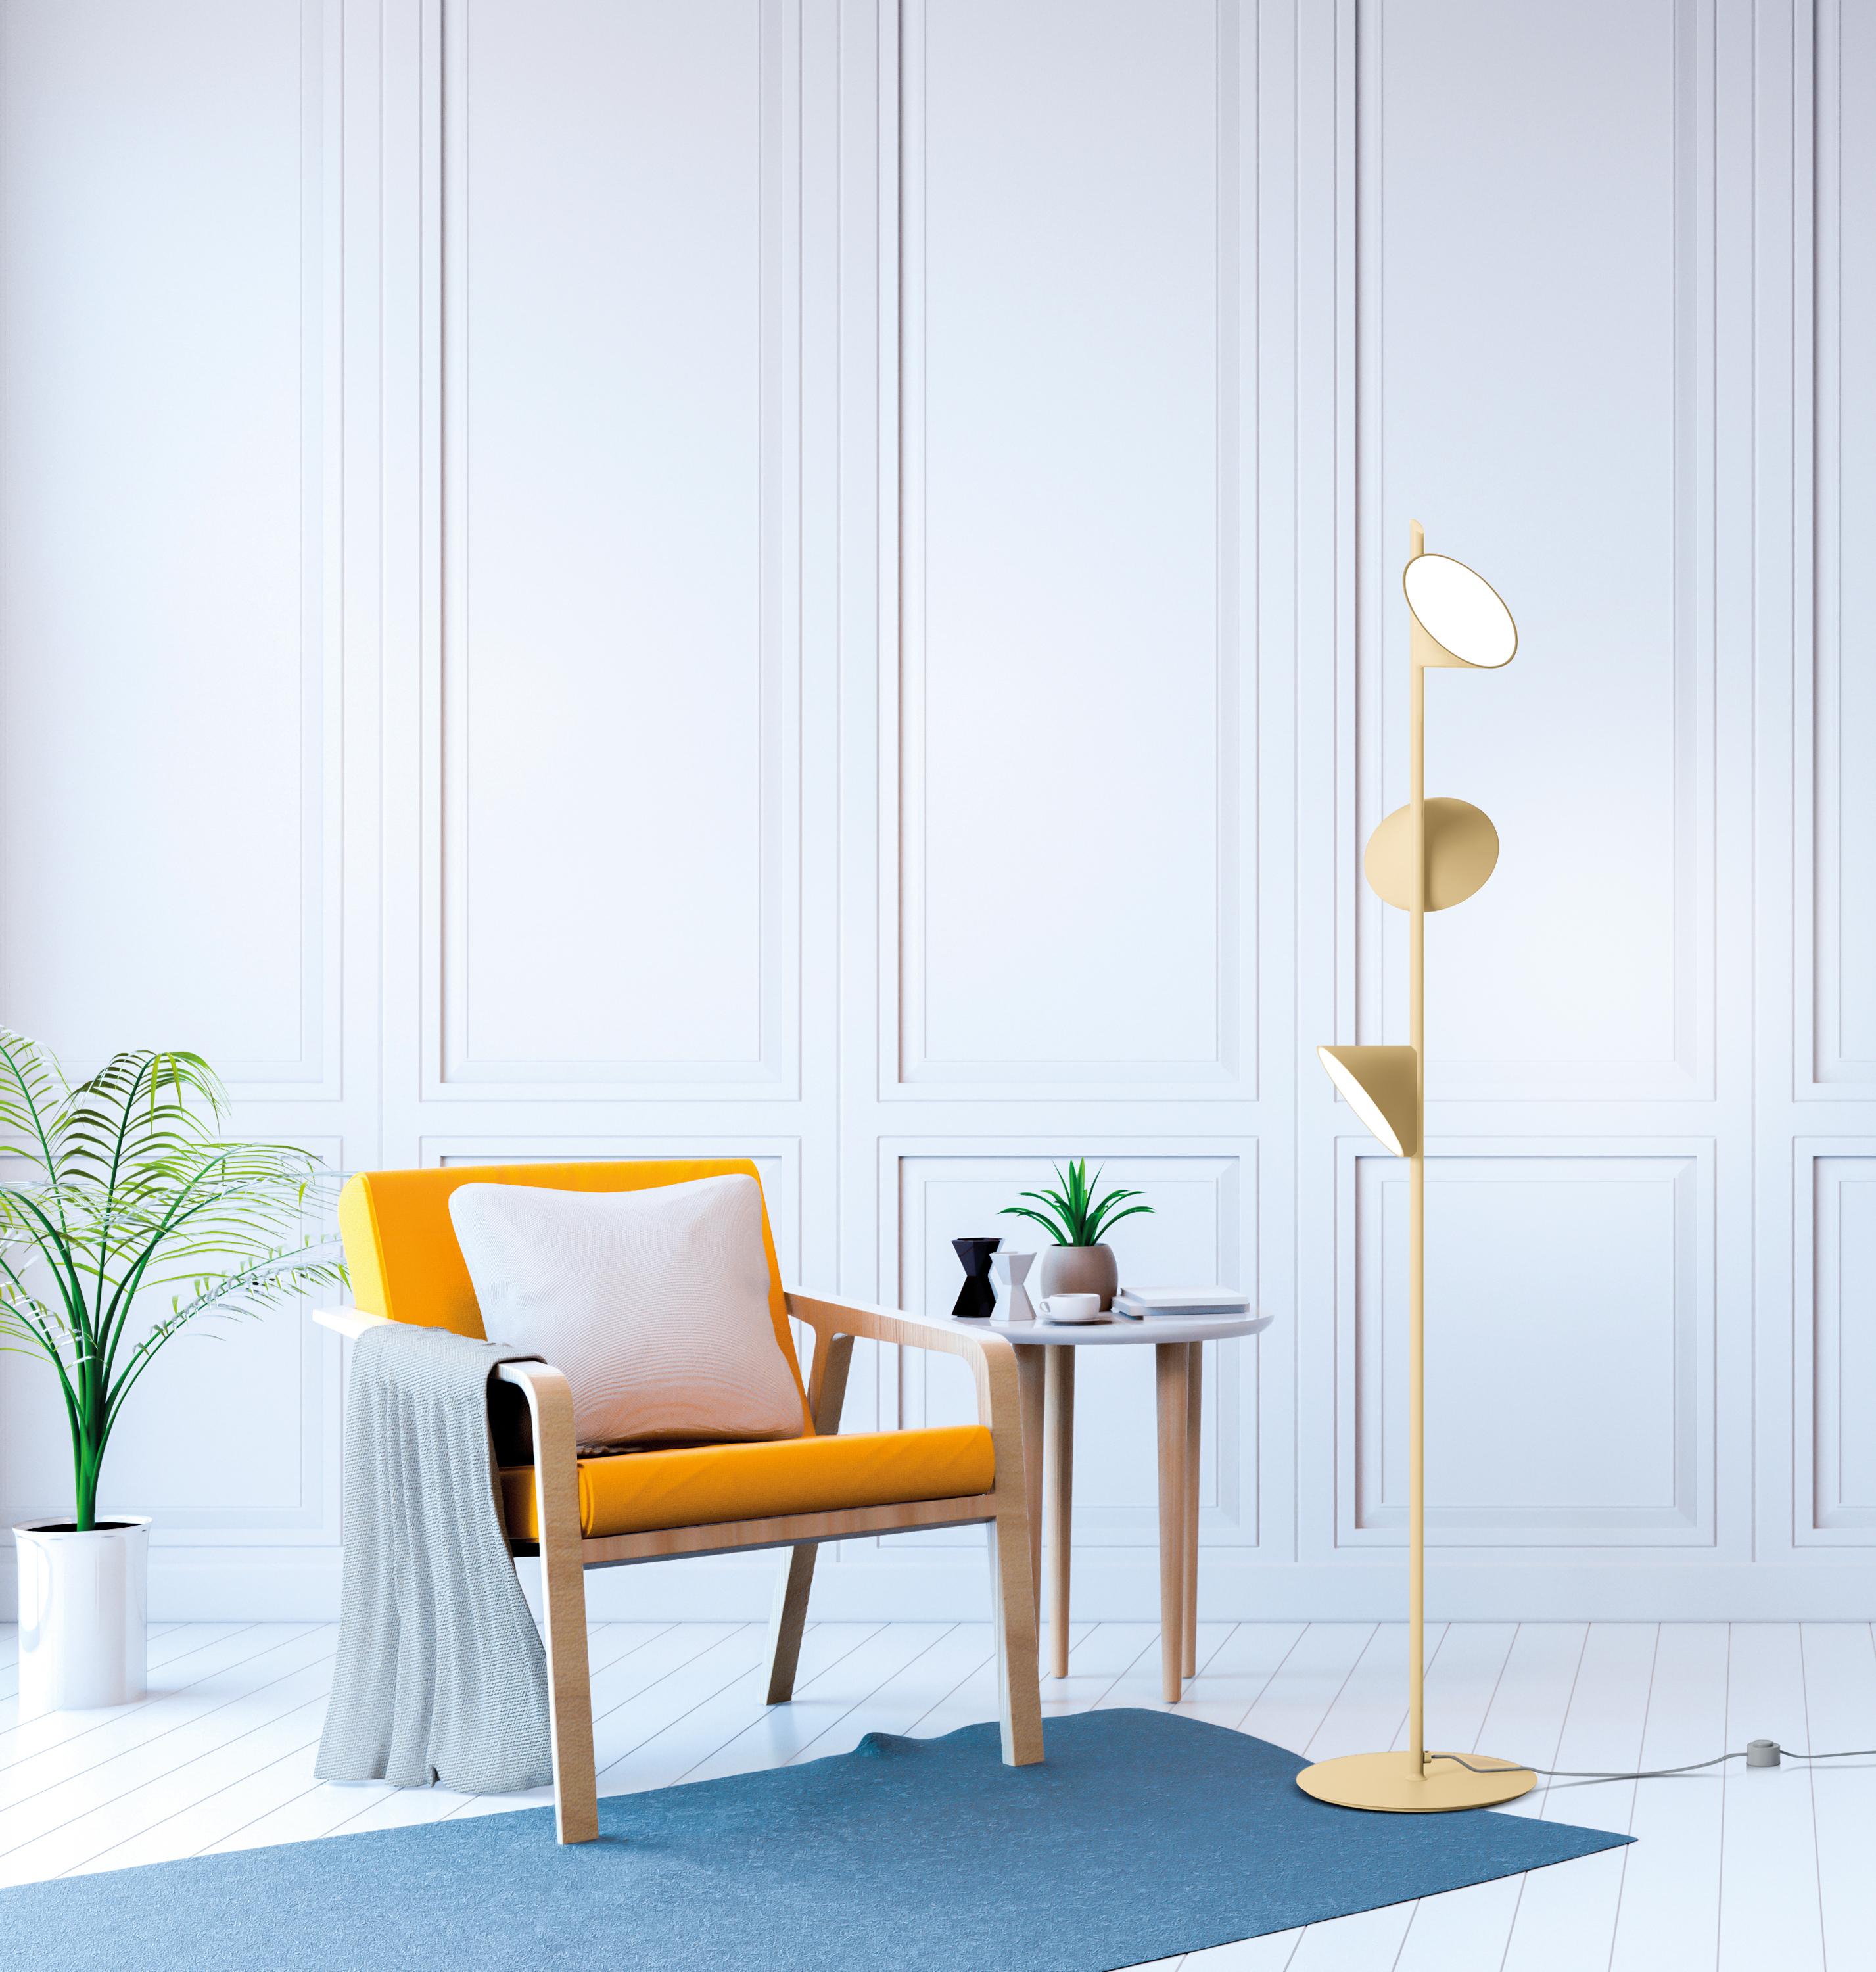 A beautiful and unique organic design, the orchid floor lamp was designed by Rainer Mutsch for Axolight. The collection was the first design that Rainer did in collaboration with Italian brand, Axolight, and has since become a popular